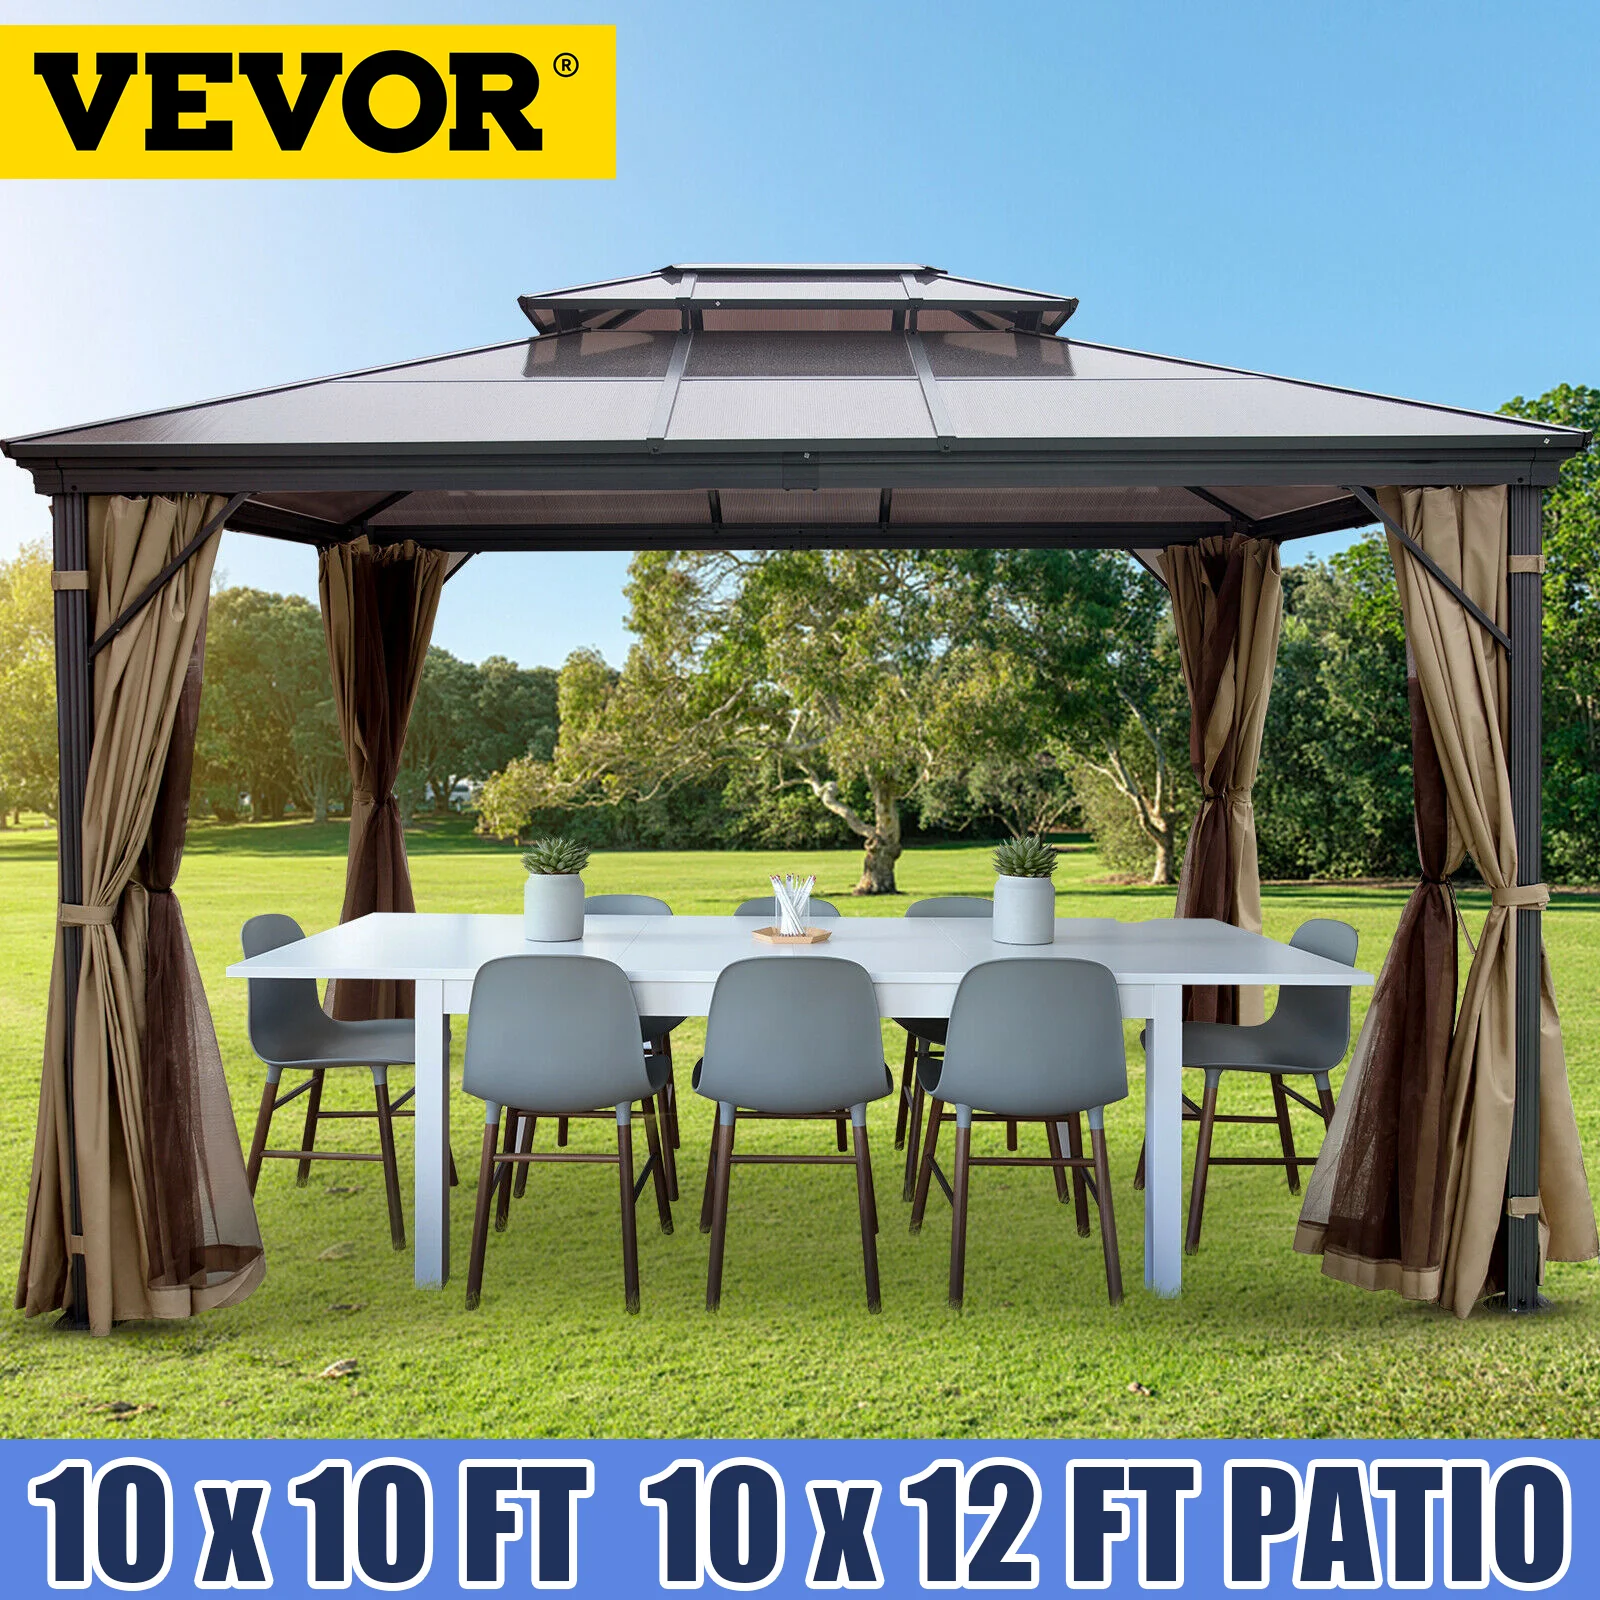 Outdoor Gazebo Tent Garden Shade Shelter Canopy Awning Party Camping Heavy Duty 